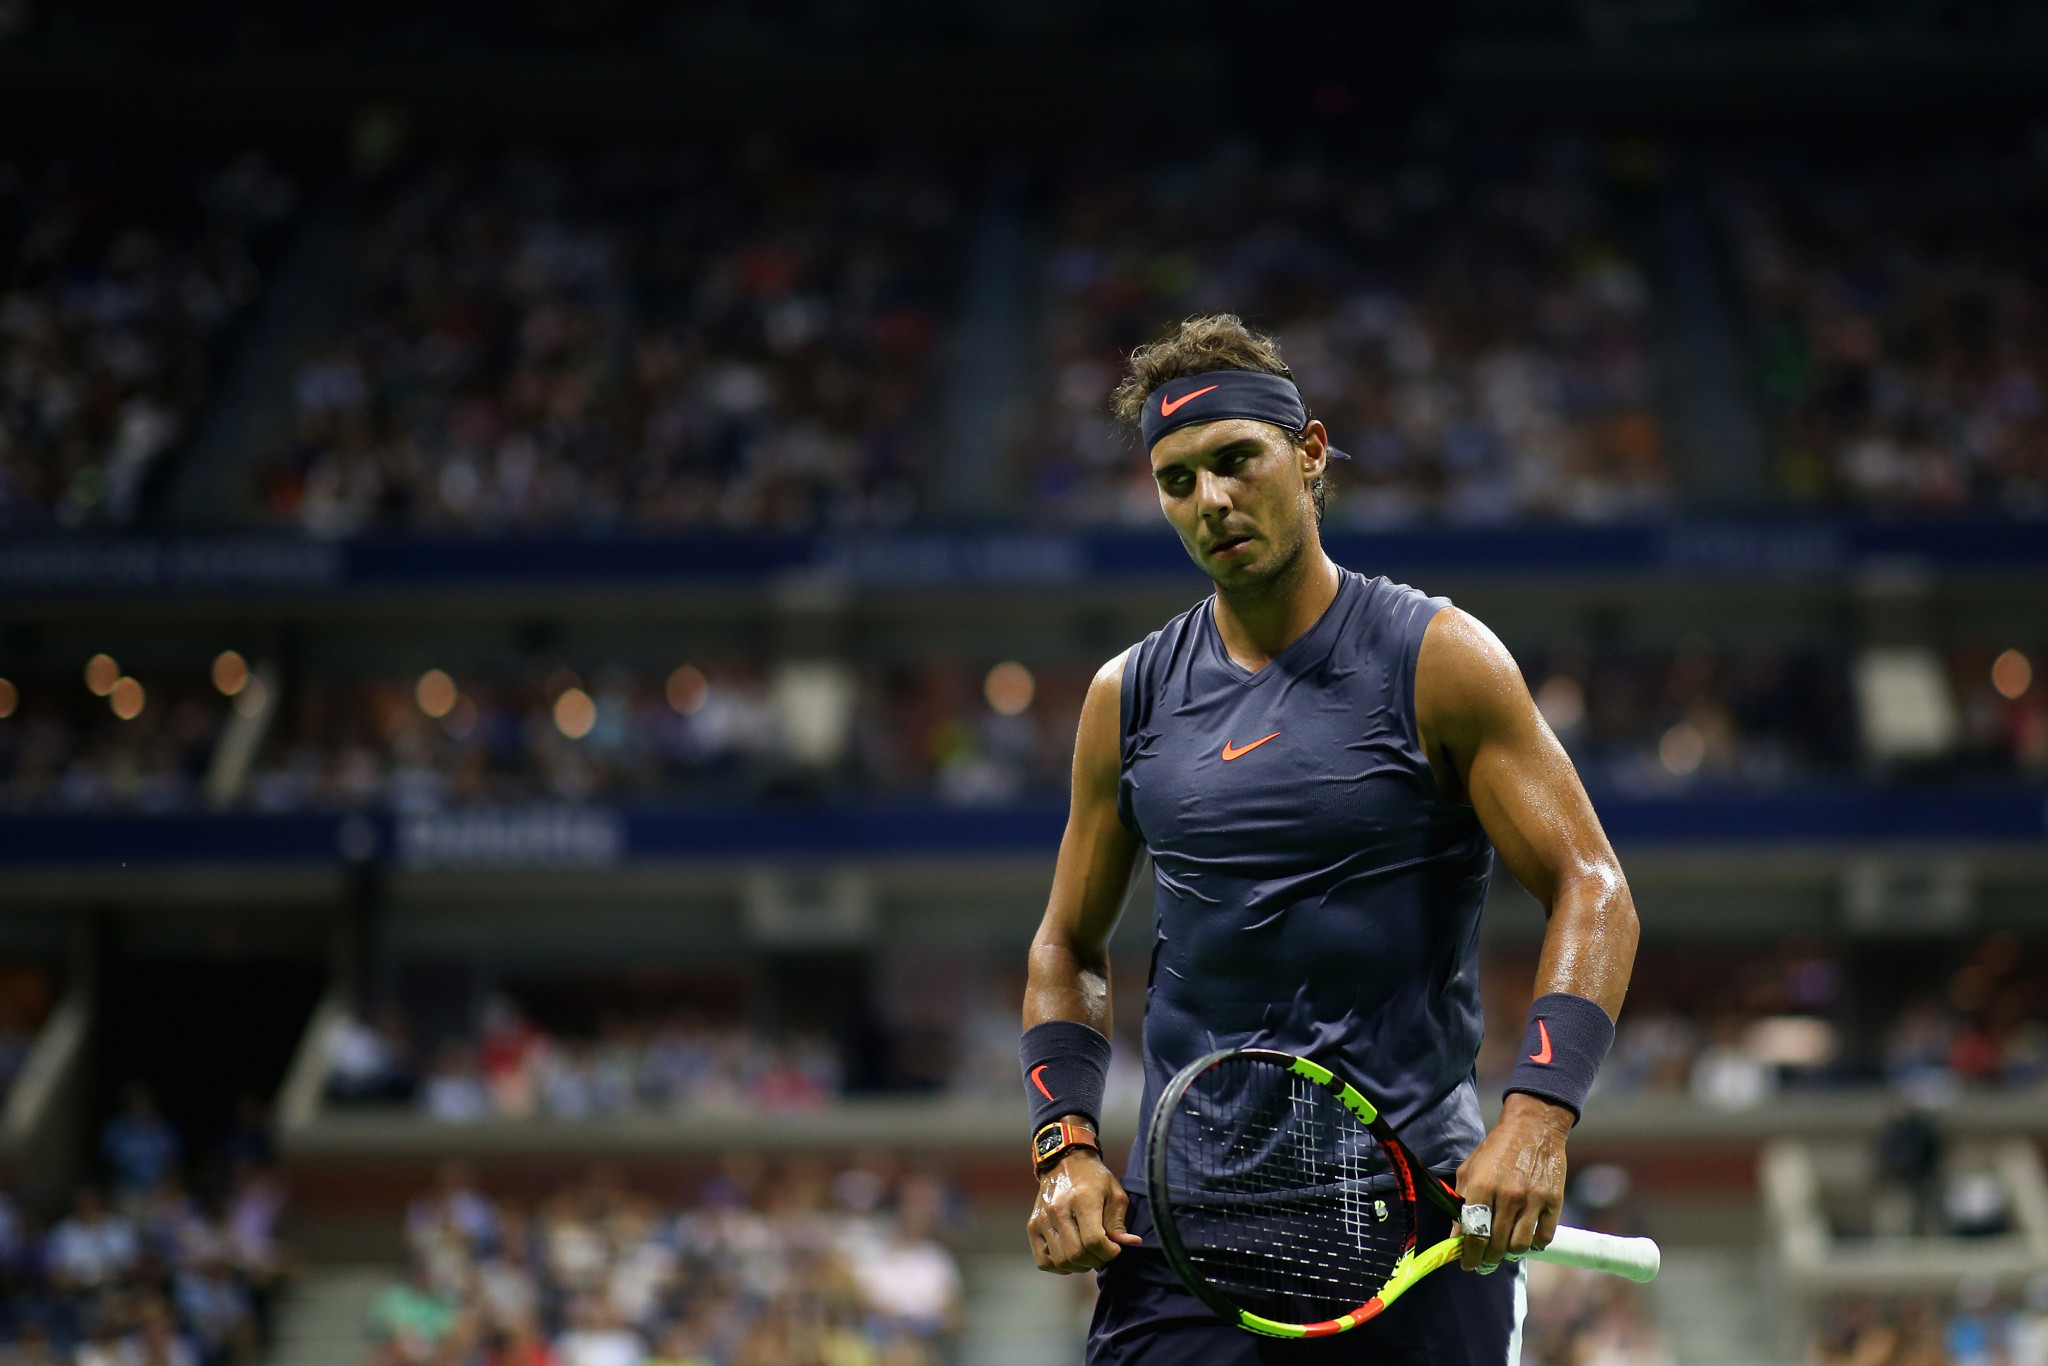 Rafael Nadal went through after David Ferrer retired ©Getty Images